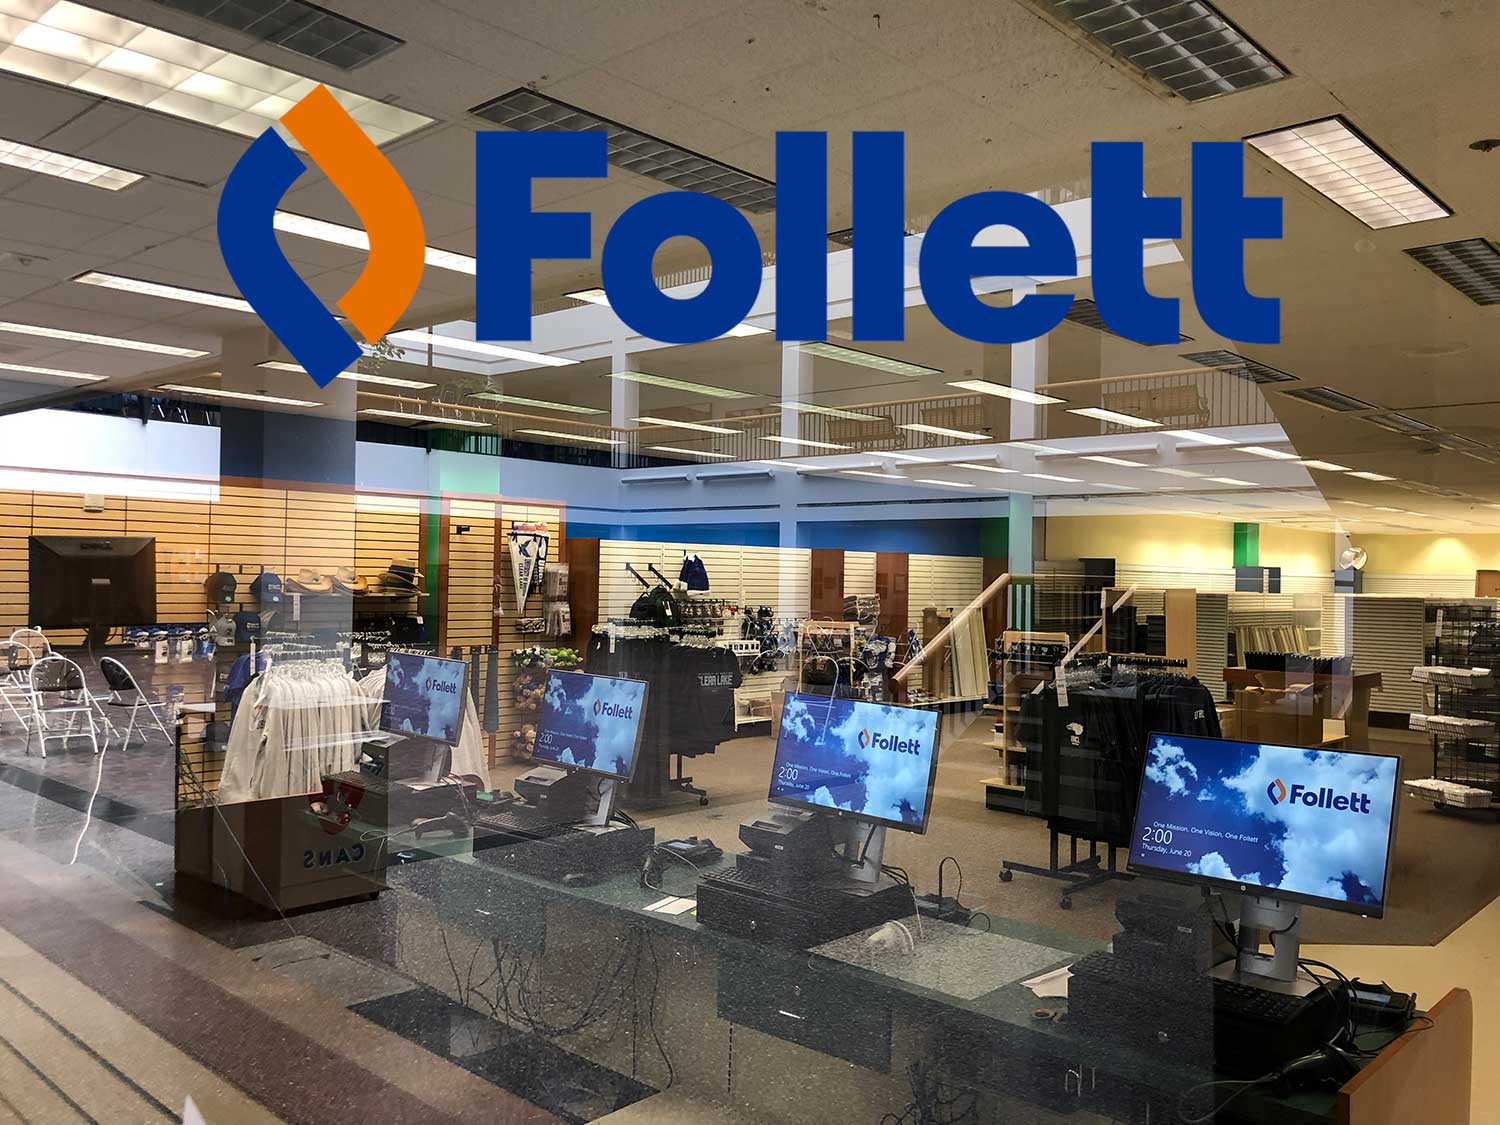 GRAPHIC: UHCL bookstore undergoing renovations to prepare for vendor switch to Follett. Graphic by The Signal Managing Editor Miles Shellshear.